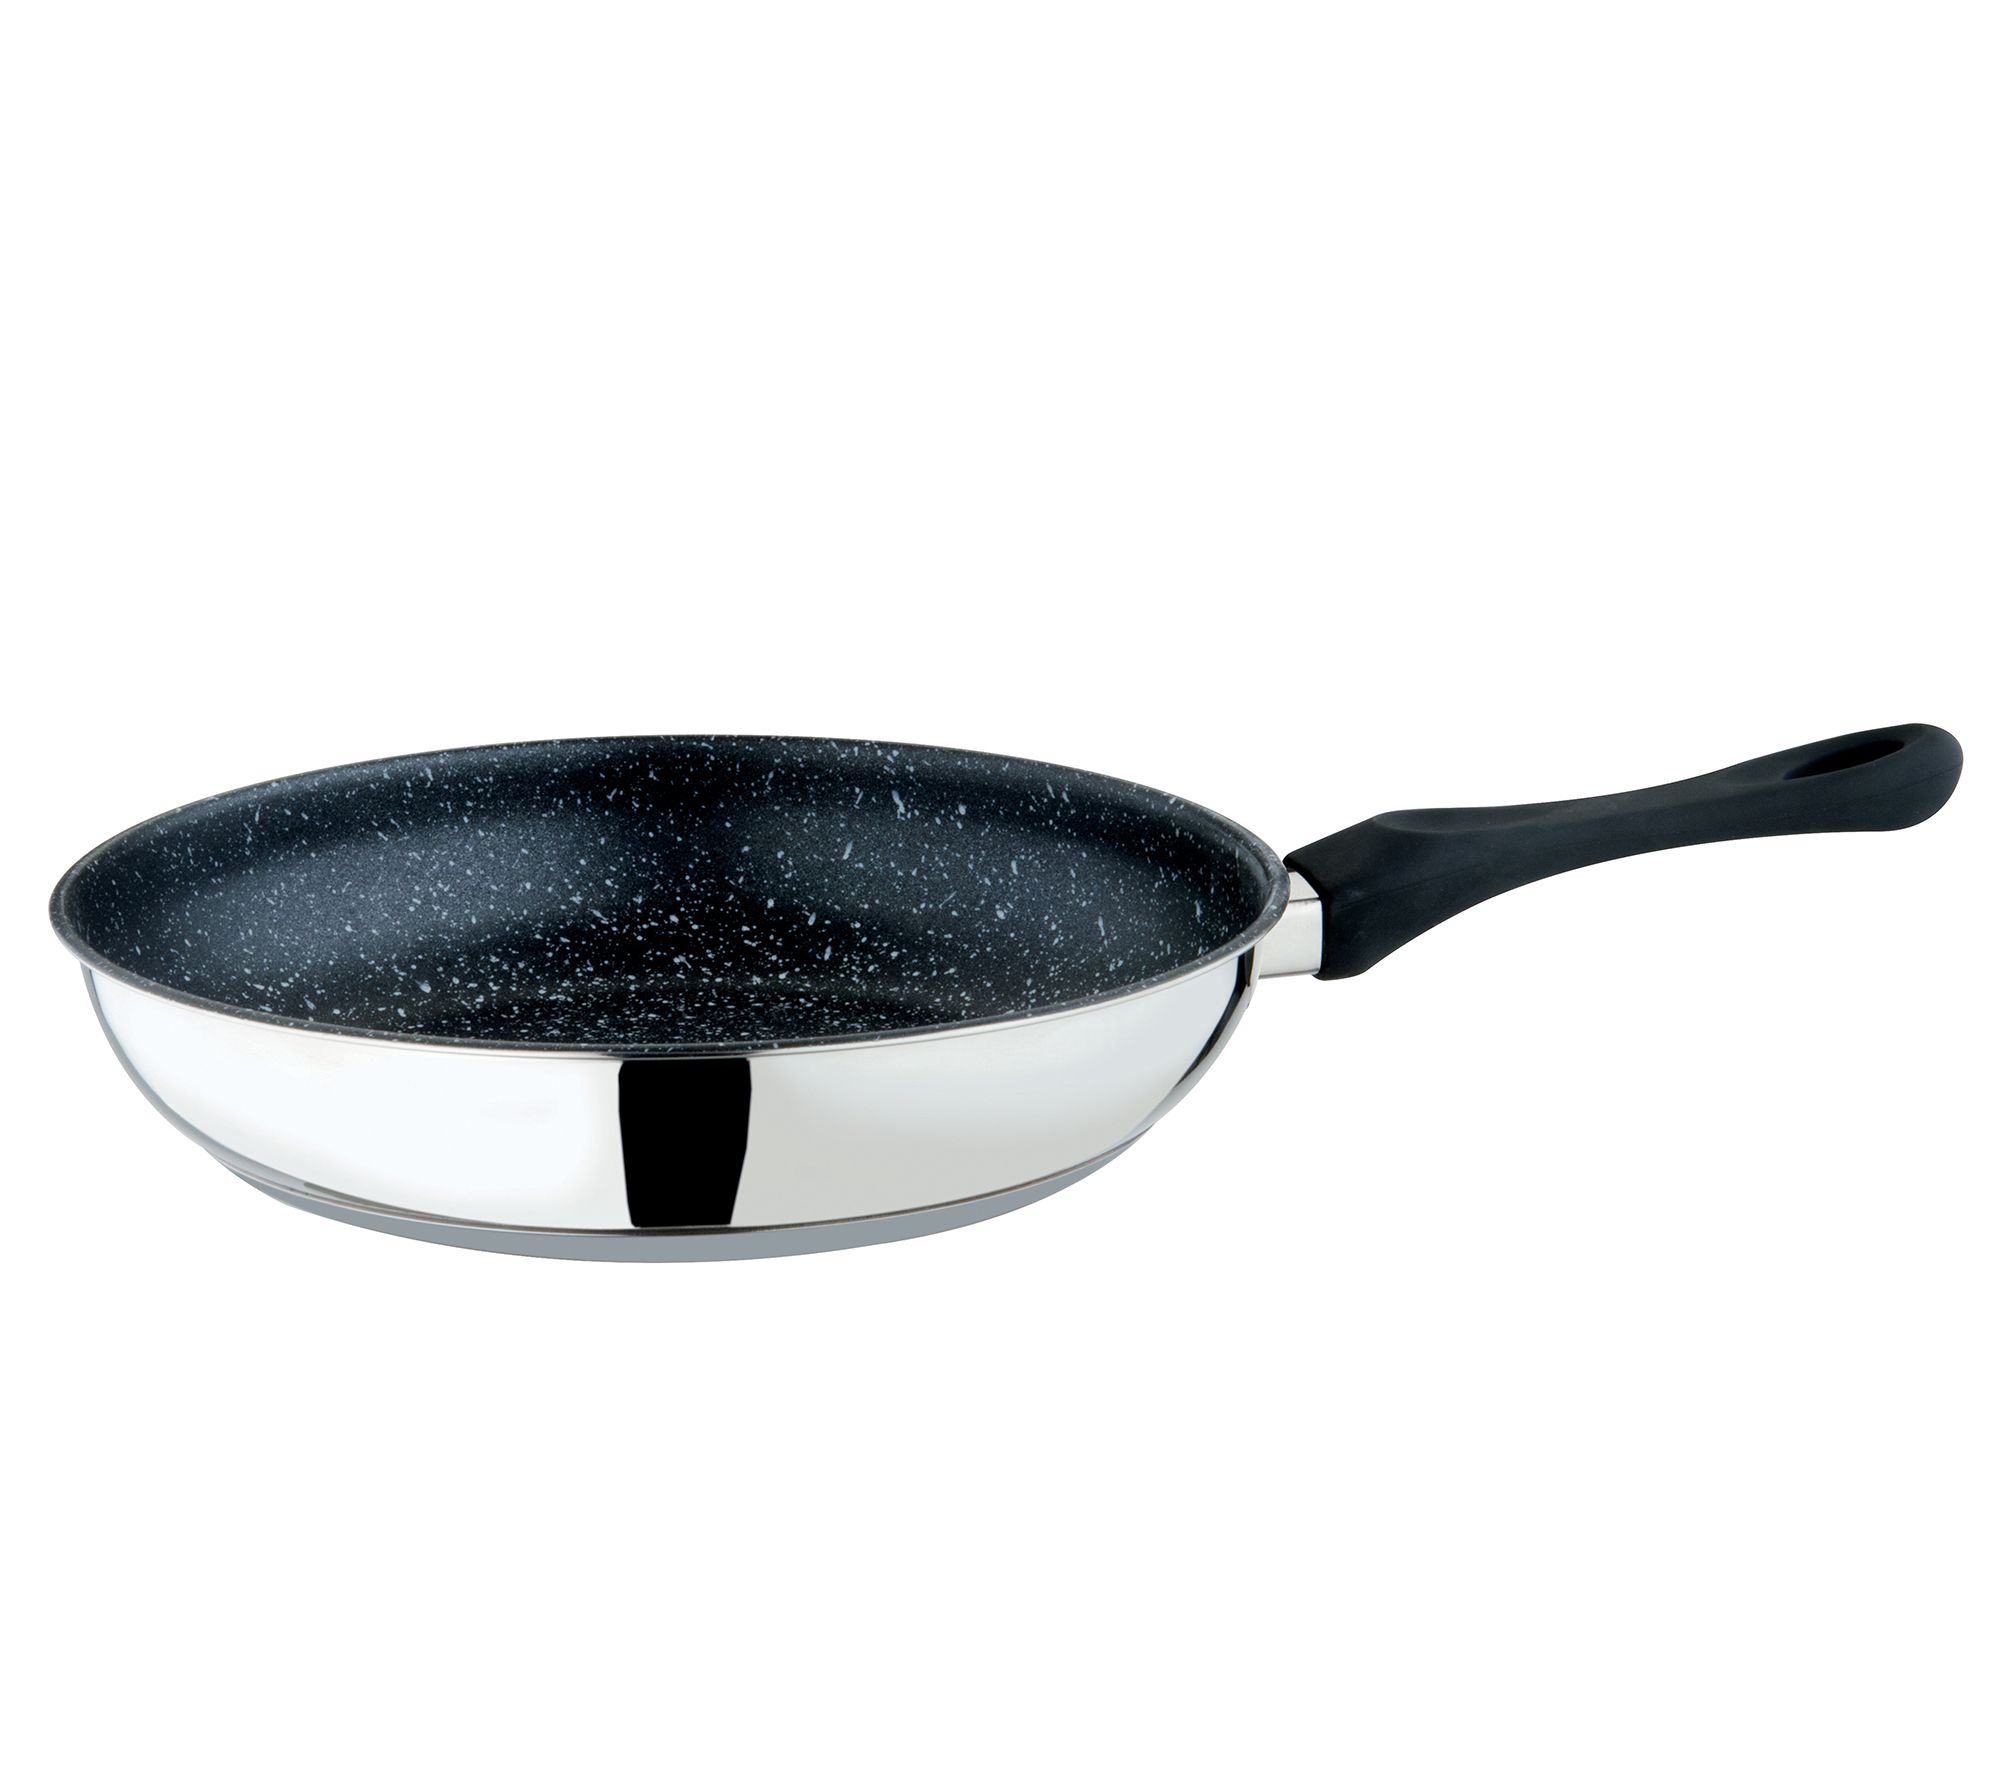 Oster Sato 10 Inch Aluminum Frying Pan in Metallic Champagne - Non